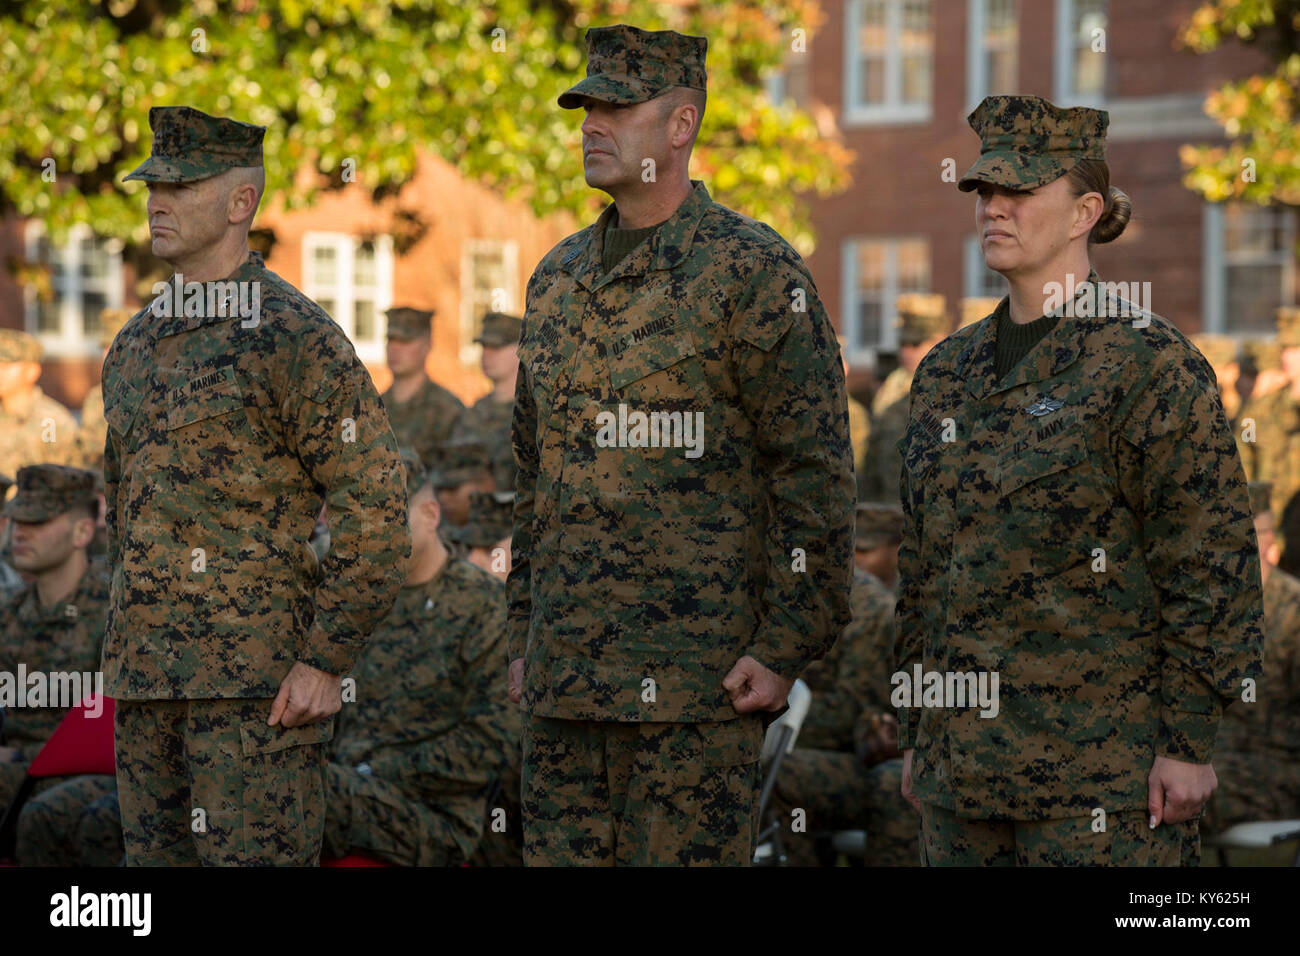 U.S. Marine Corps Maj. Gen. John K. Love, commanding general, 2nd Marine Division (2d MARDIV), left, Sgt. Maj. Michael P. Woods, sergeant major, 2d MARDIV, Senior Chief Petty Officer Jill Bankus stand at attention during a morning colors award ceremony on Camp Lejeune, N.C., Dec. 12, 2017. The ceremony is held to honor colors as well as award Marines and Sailors. (U.S. Marine Corps Stock Photo